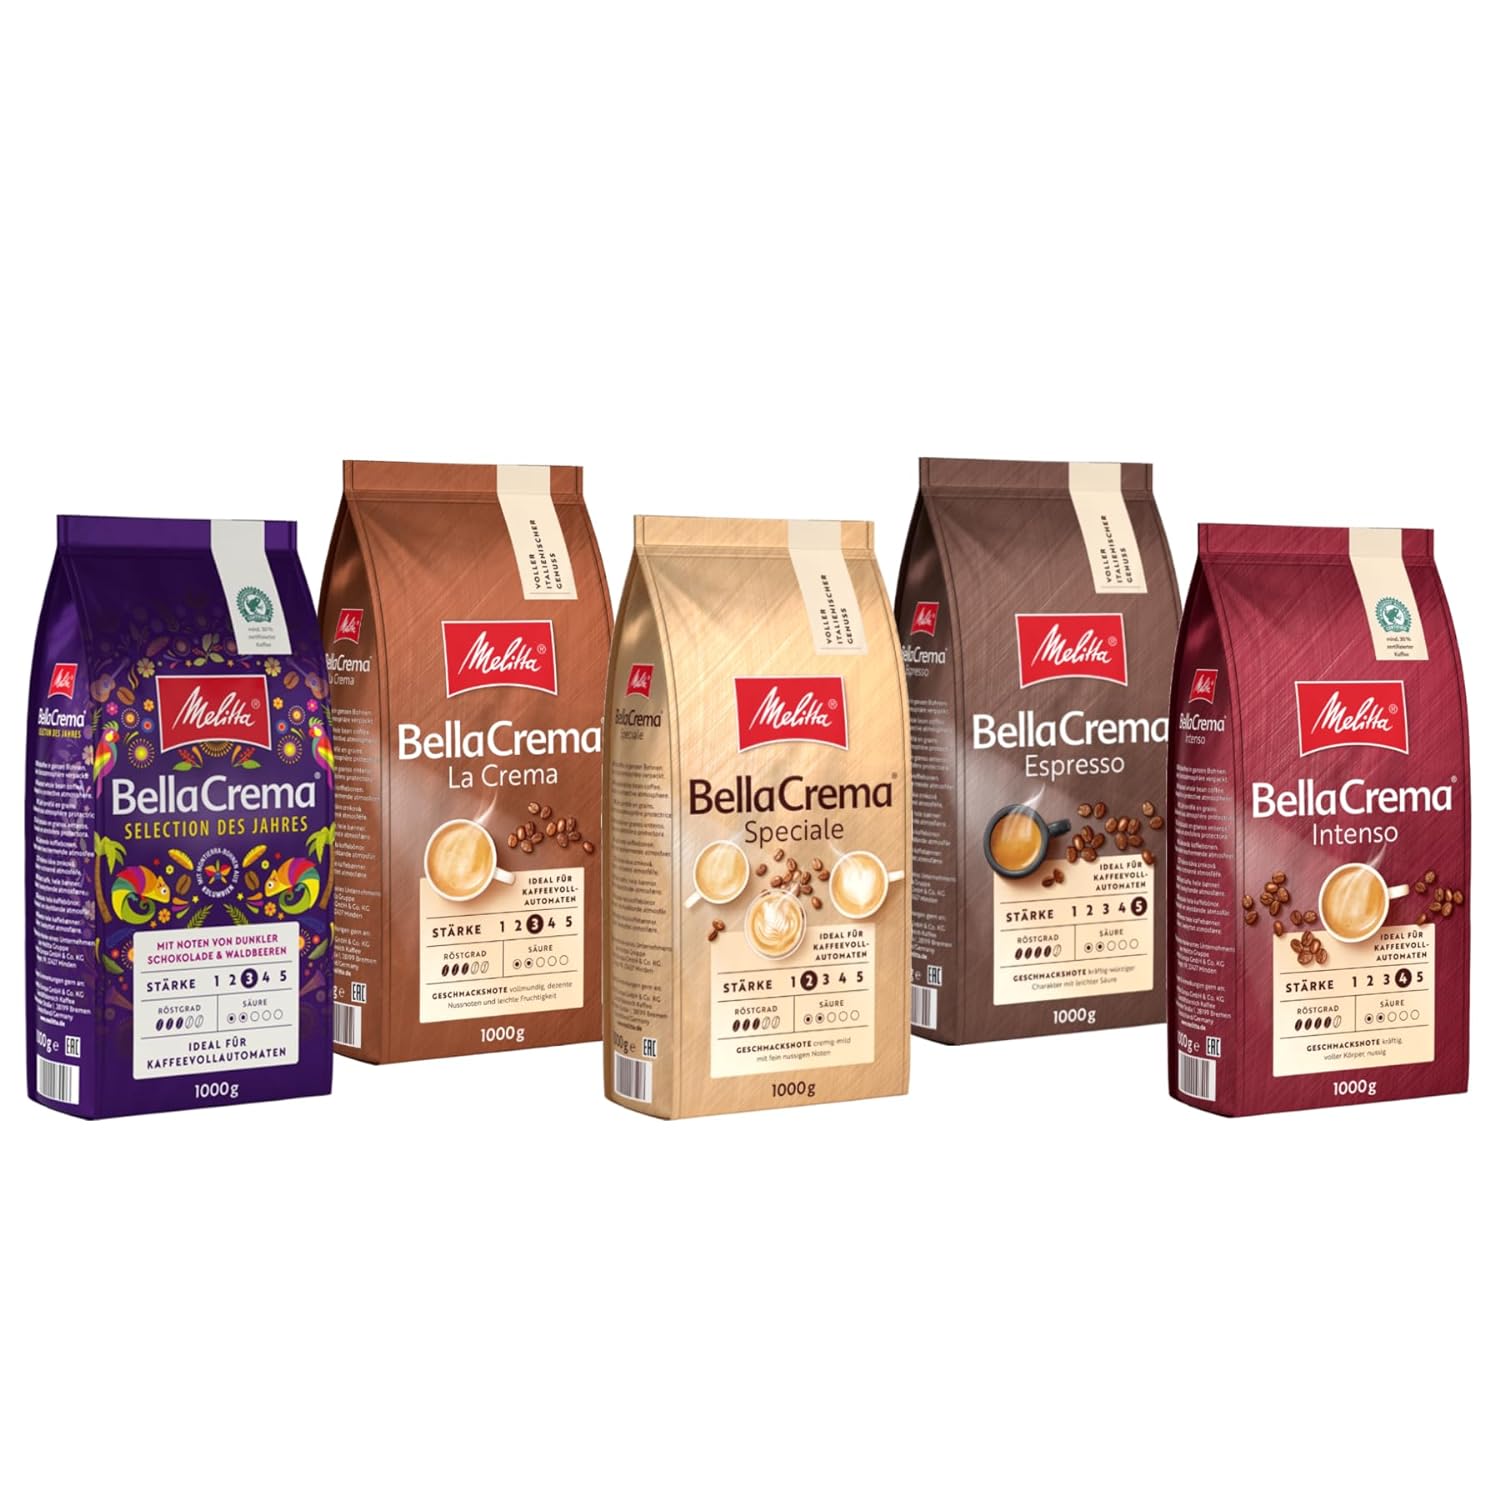 Melitta Bellacrema La Crema Speciale Intresso Selcation of the Year Whole Coffee Beans 5 x 1 kg, Unzround, Coffee Beans for Fully Automatic Coffee, Roasted in Germany